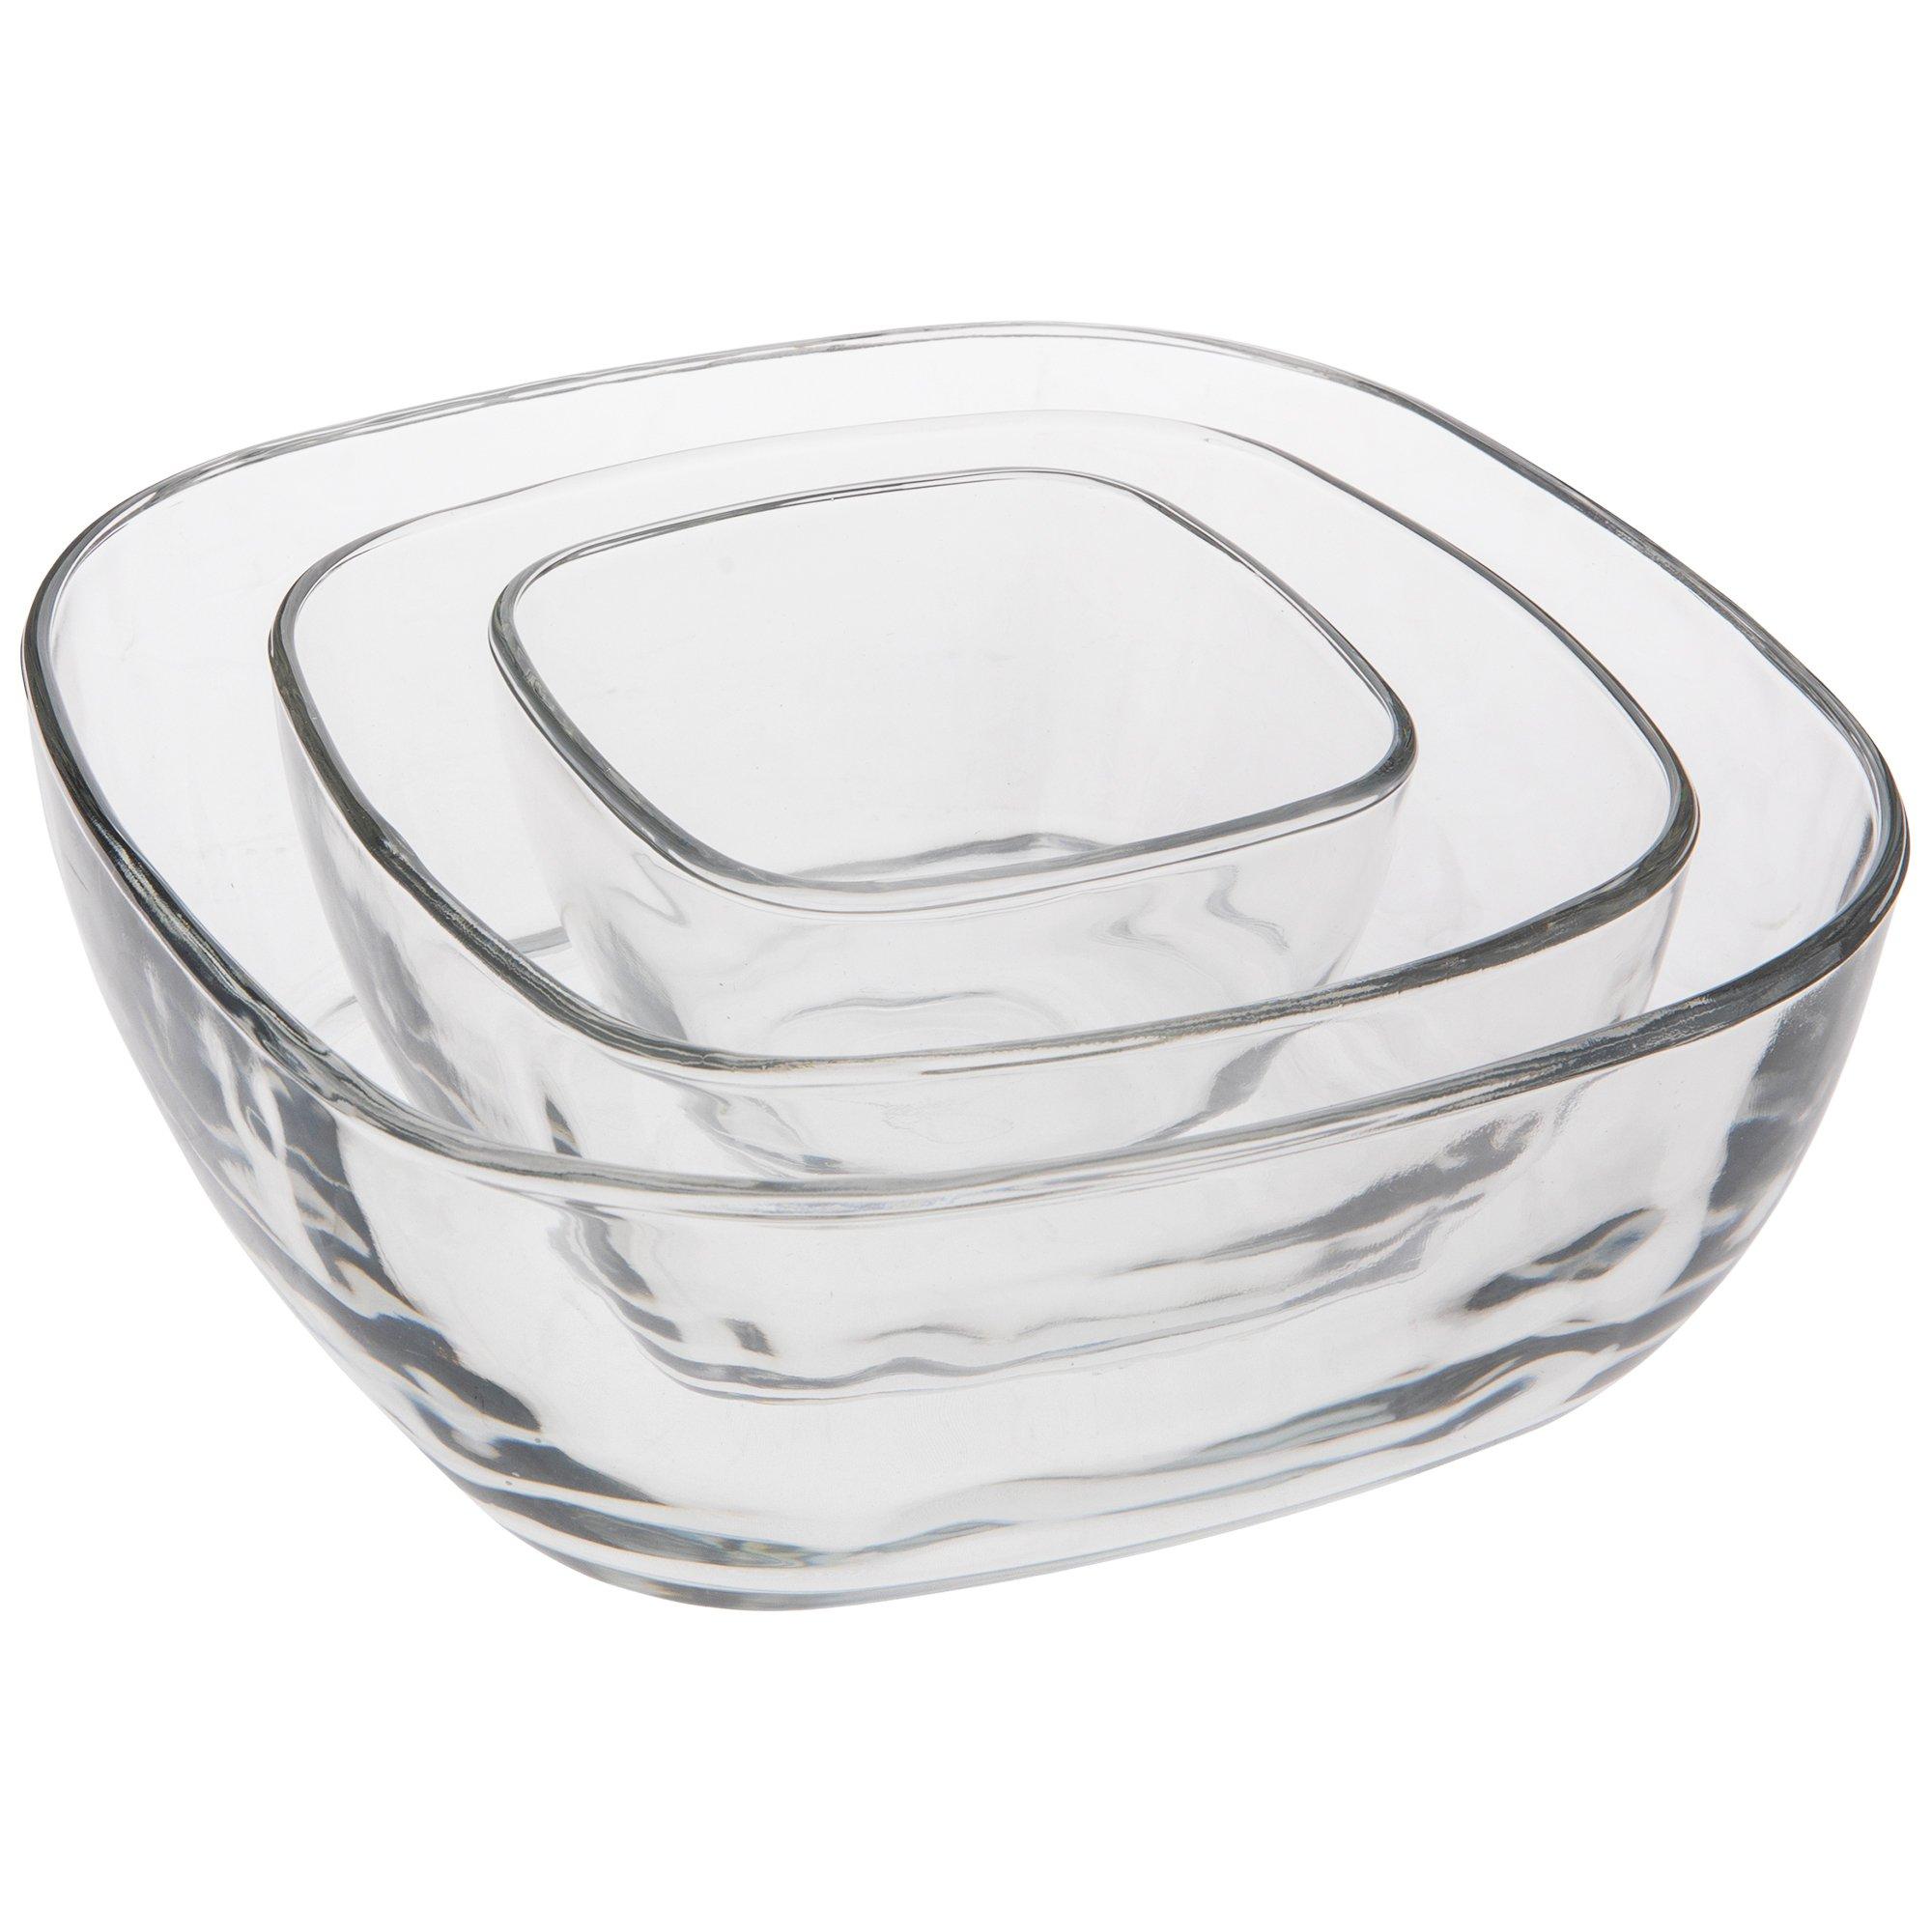 Hutzler 3-White Small Melamine Nesting Prep Bowls with Lids (2-Pack)  3580-2WH - The Home Depot